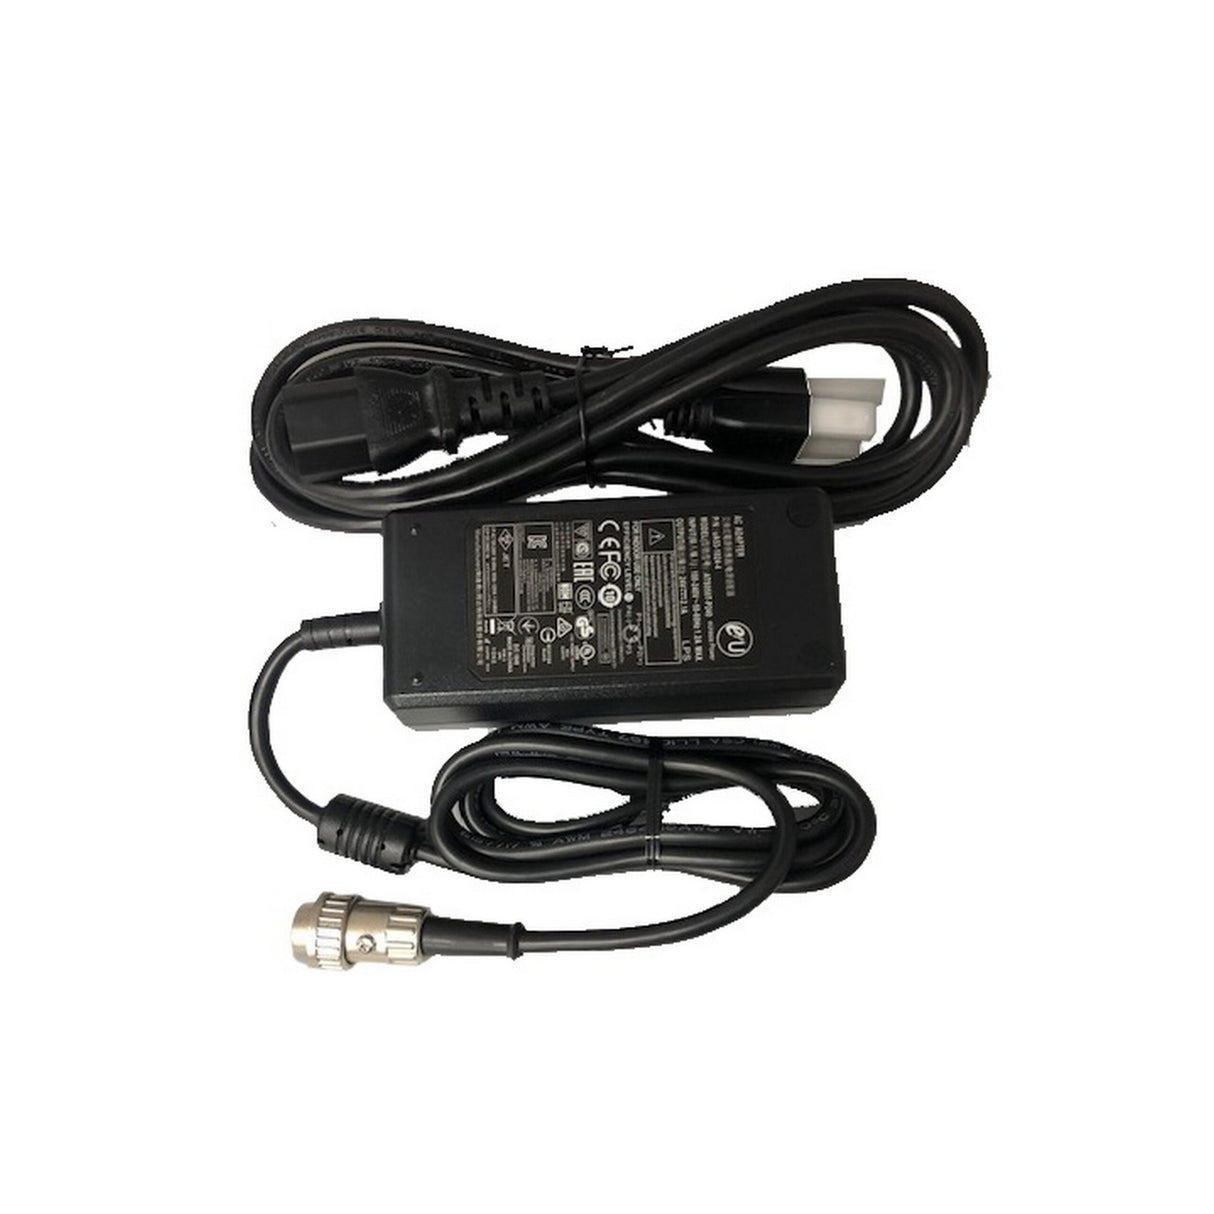 Clear-Com 453G023-3 In-Line AC Adapter for FreeSpeak II Transceiver